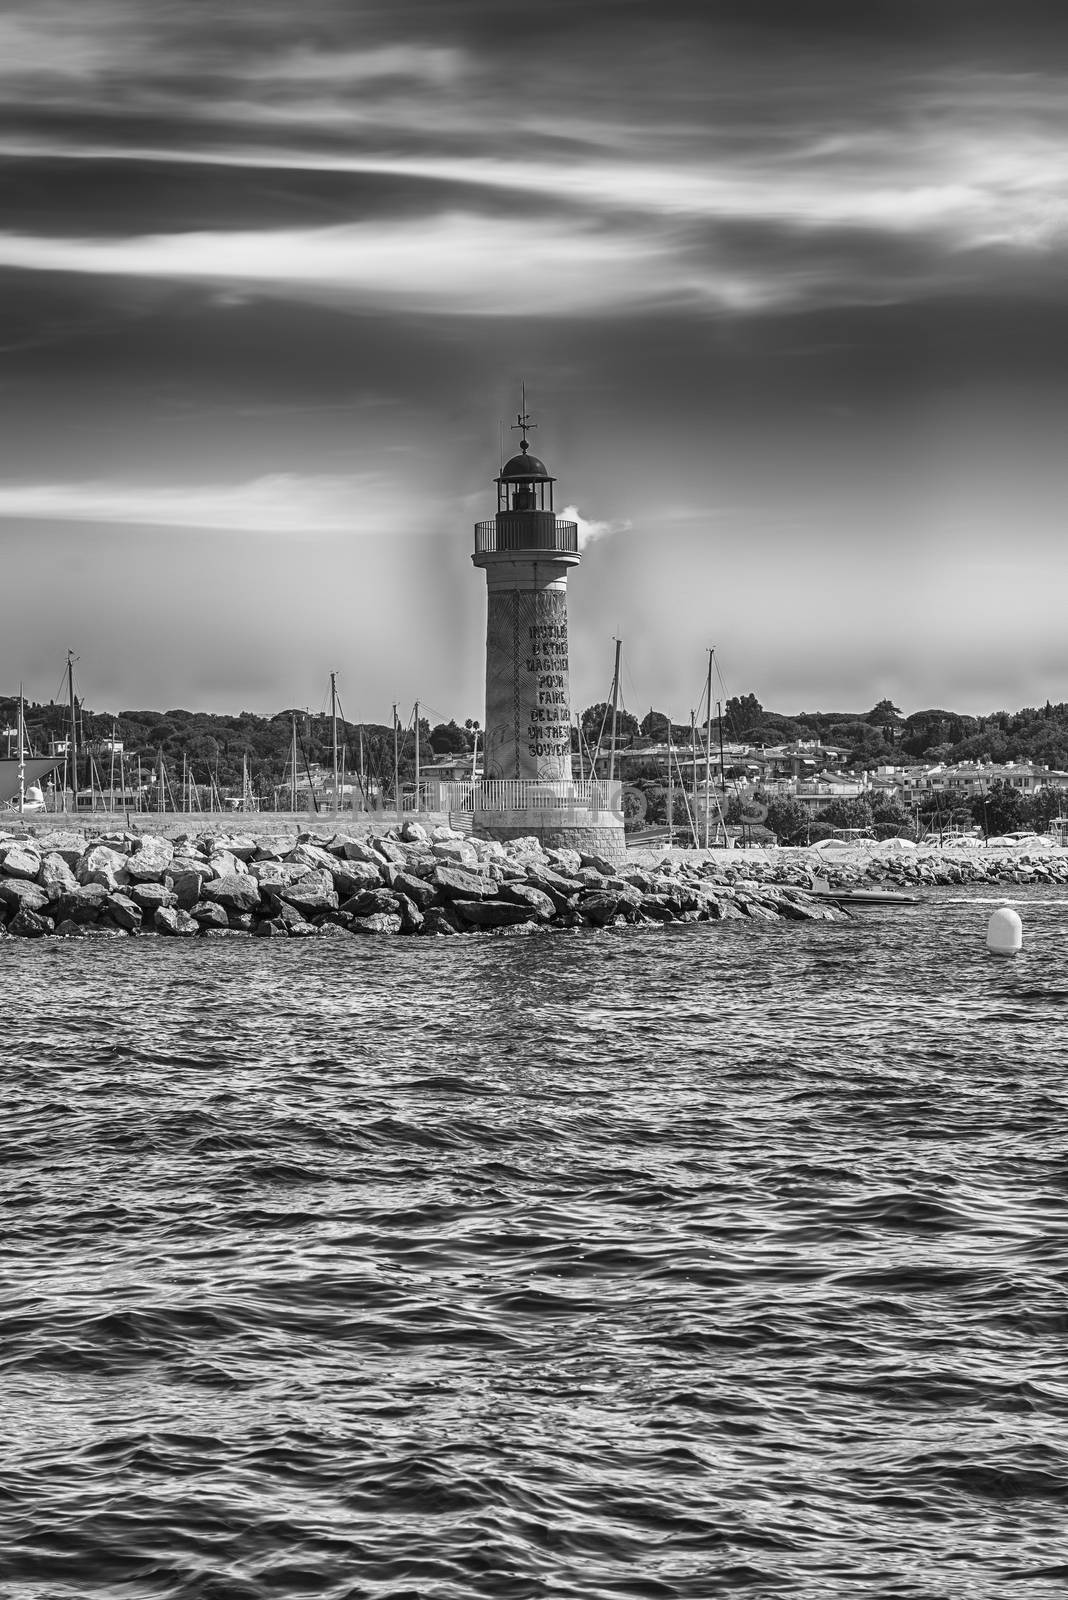 Iconic lighthouse in the harbor of Saint-Tropez, Cote d'Azur, Fr by marcorubino